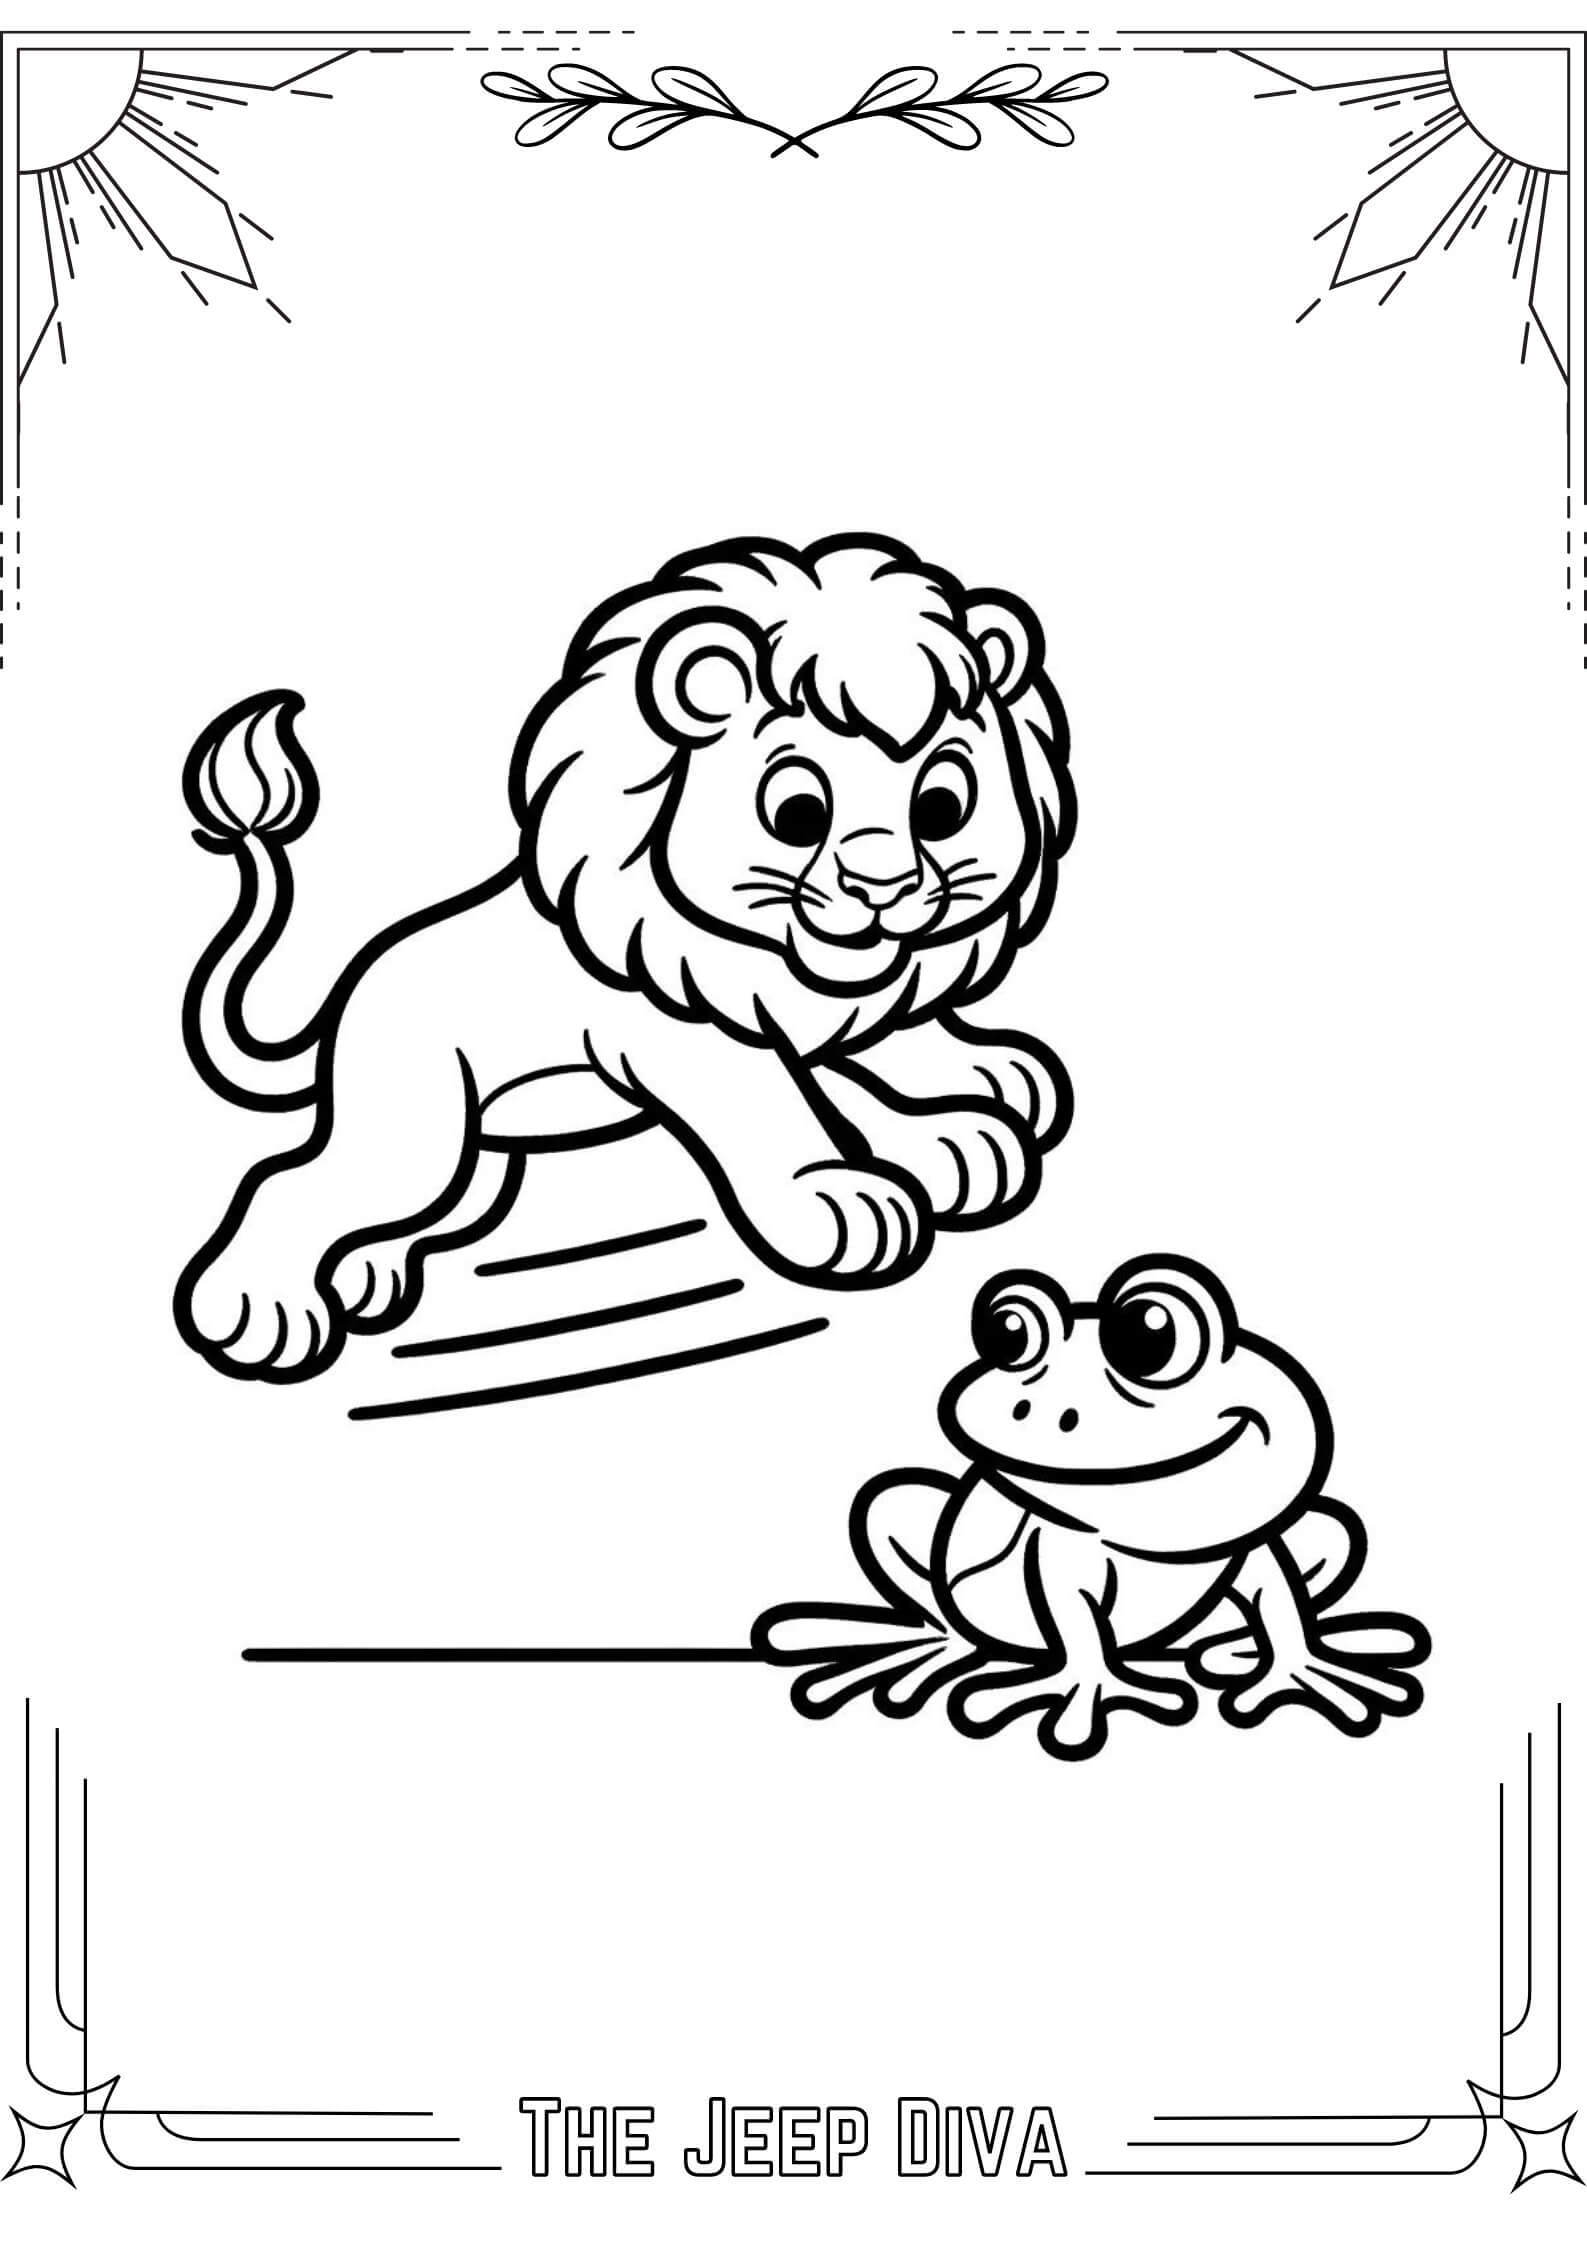 The Jeep Diva Coloring Page Lion Medium Difficulty 13